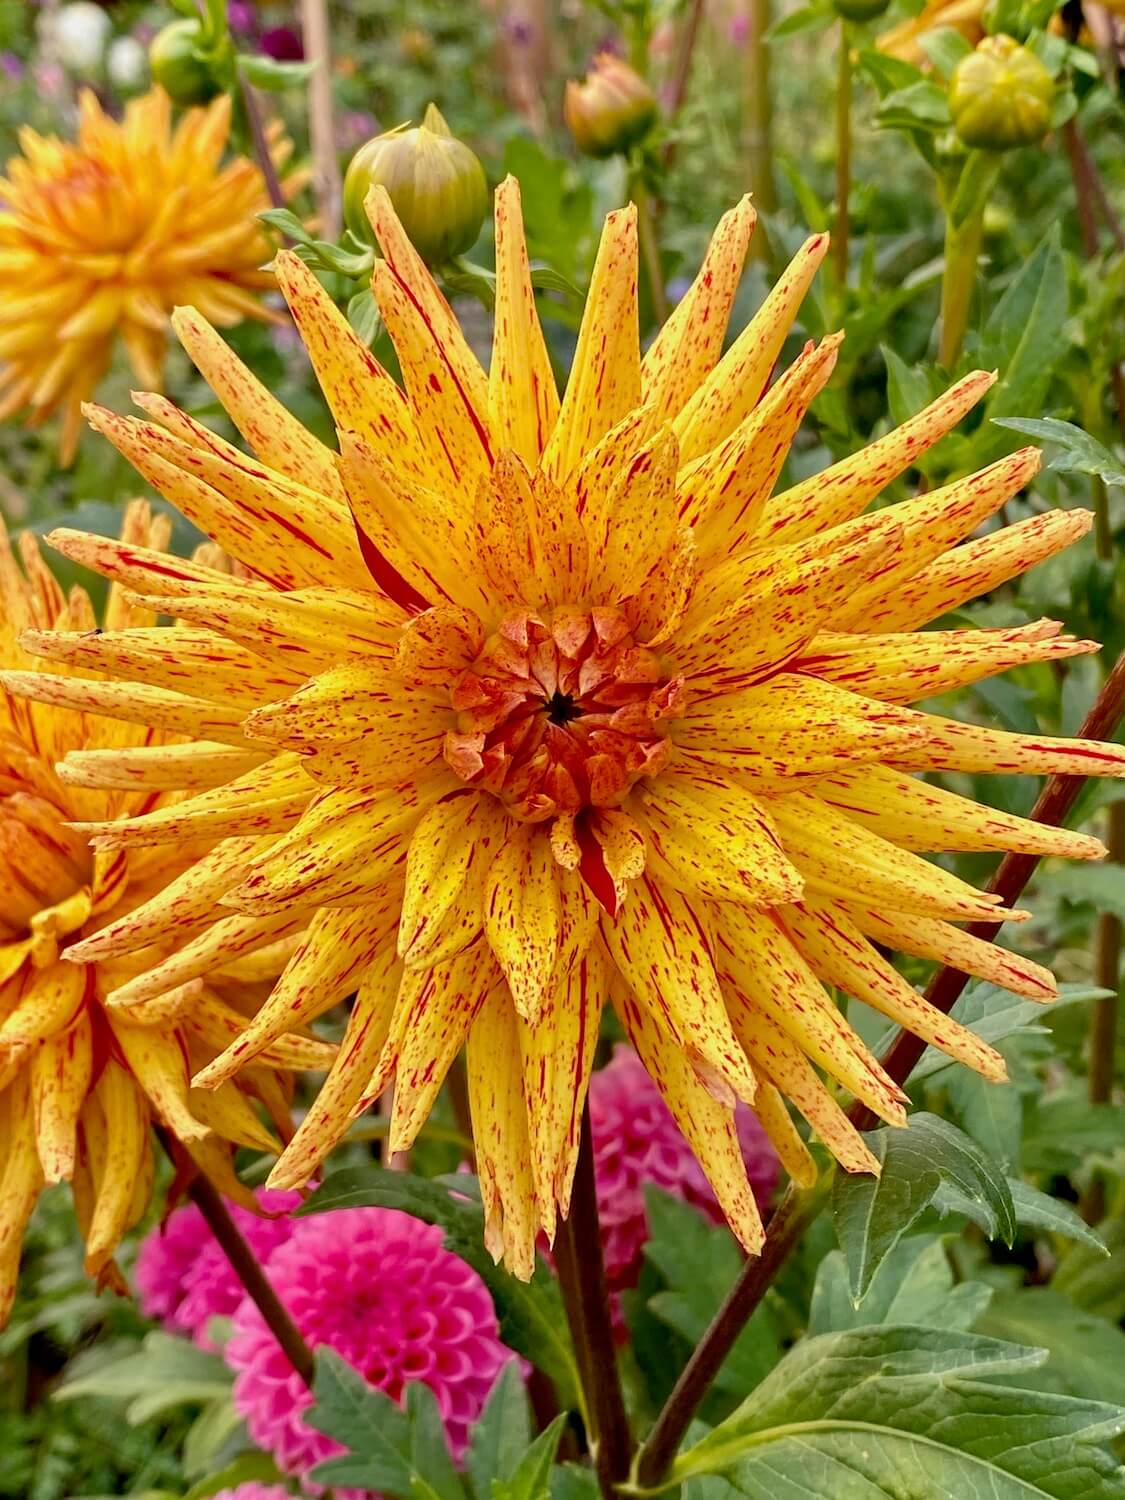 A brightly colored Dahlia flower blooms proudly in a Seattle P-Patch garden. The pedals are a beautiful orange yellow color with specks of bright red and there are several other flower bulbs around this bloom and more green foliage behind this plant.